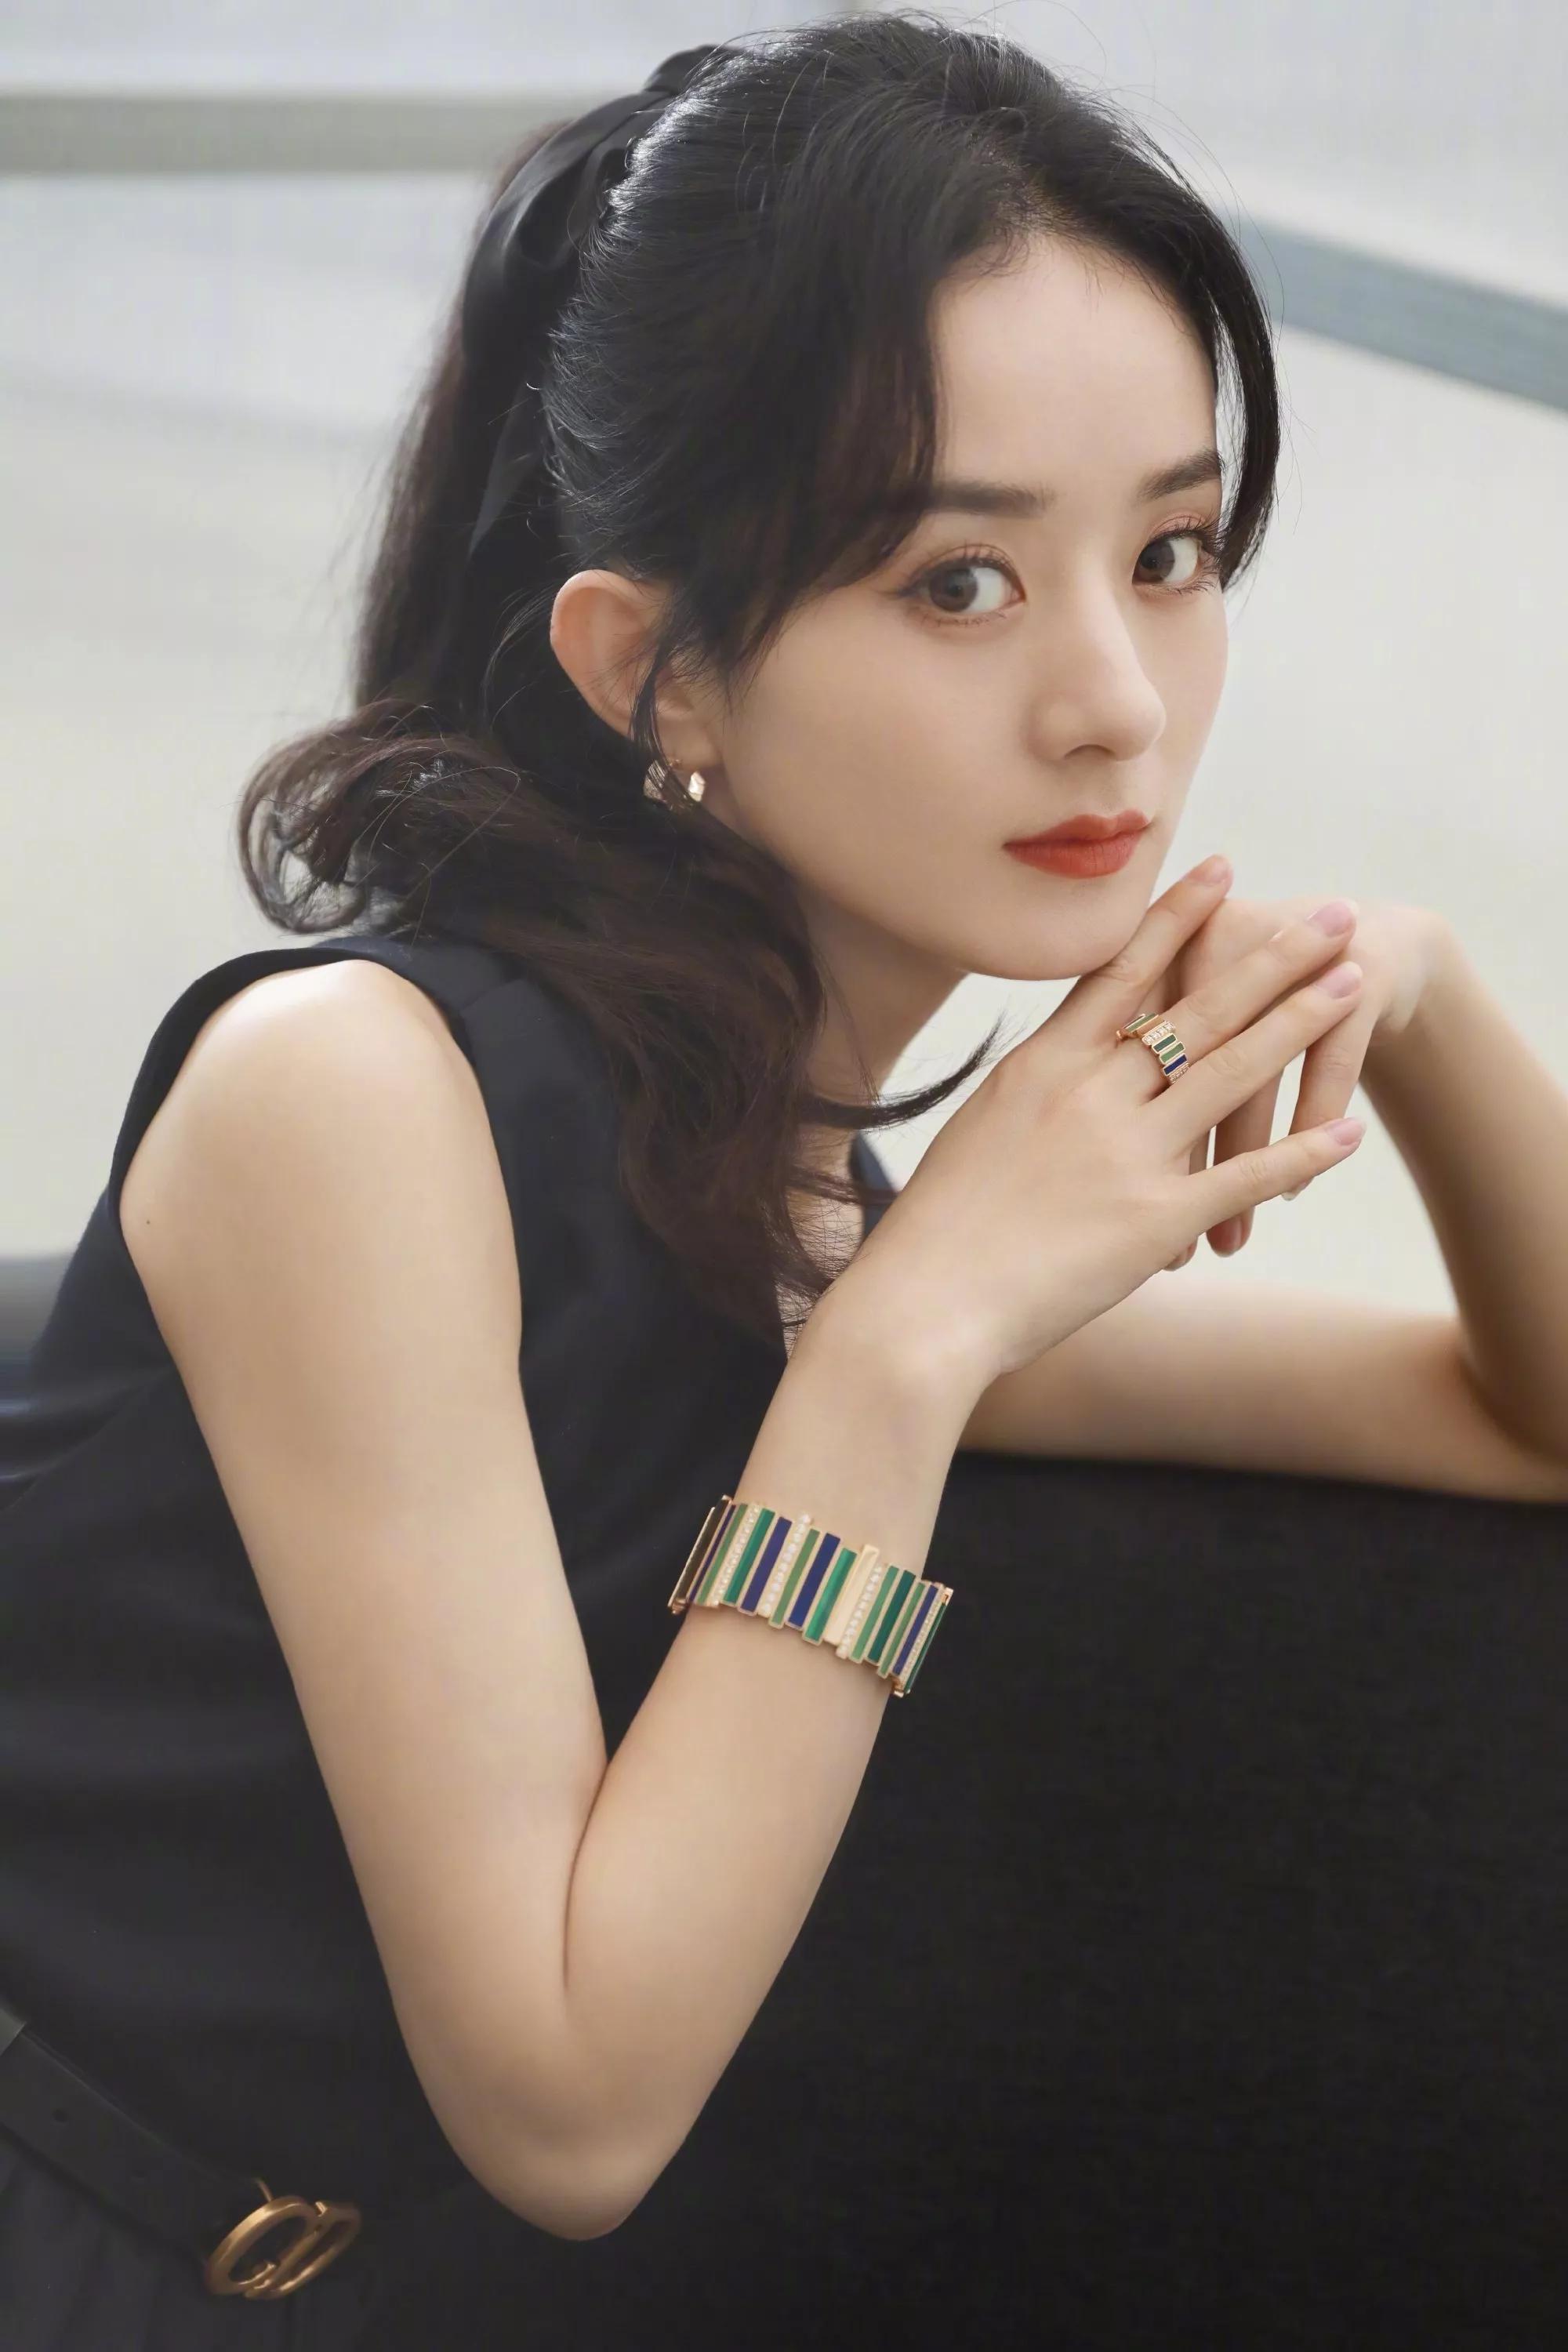 Simple is also a beauty - Zhao Liying black dress, simple match ...